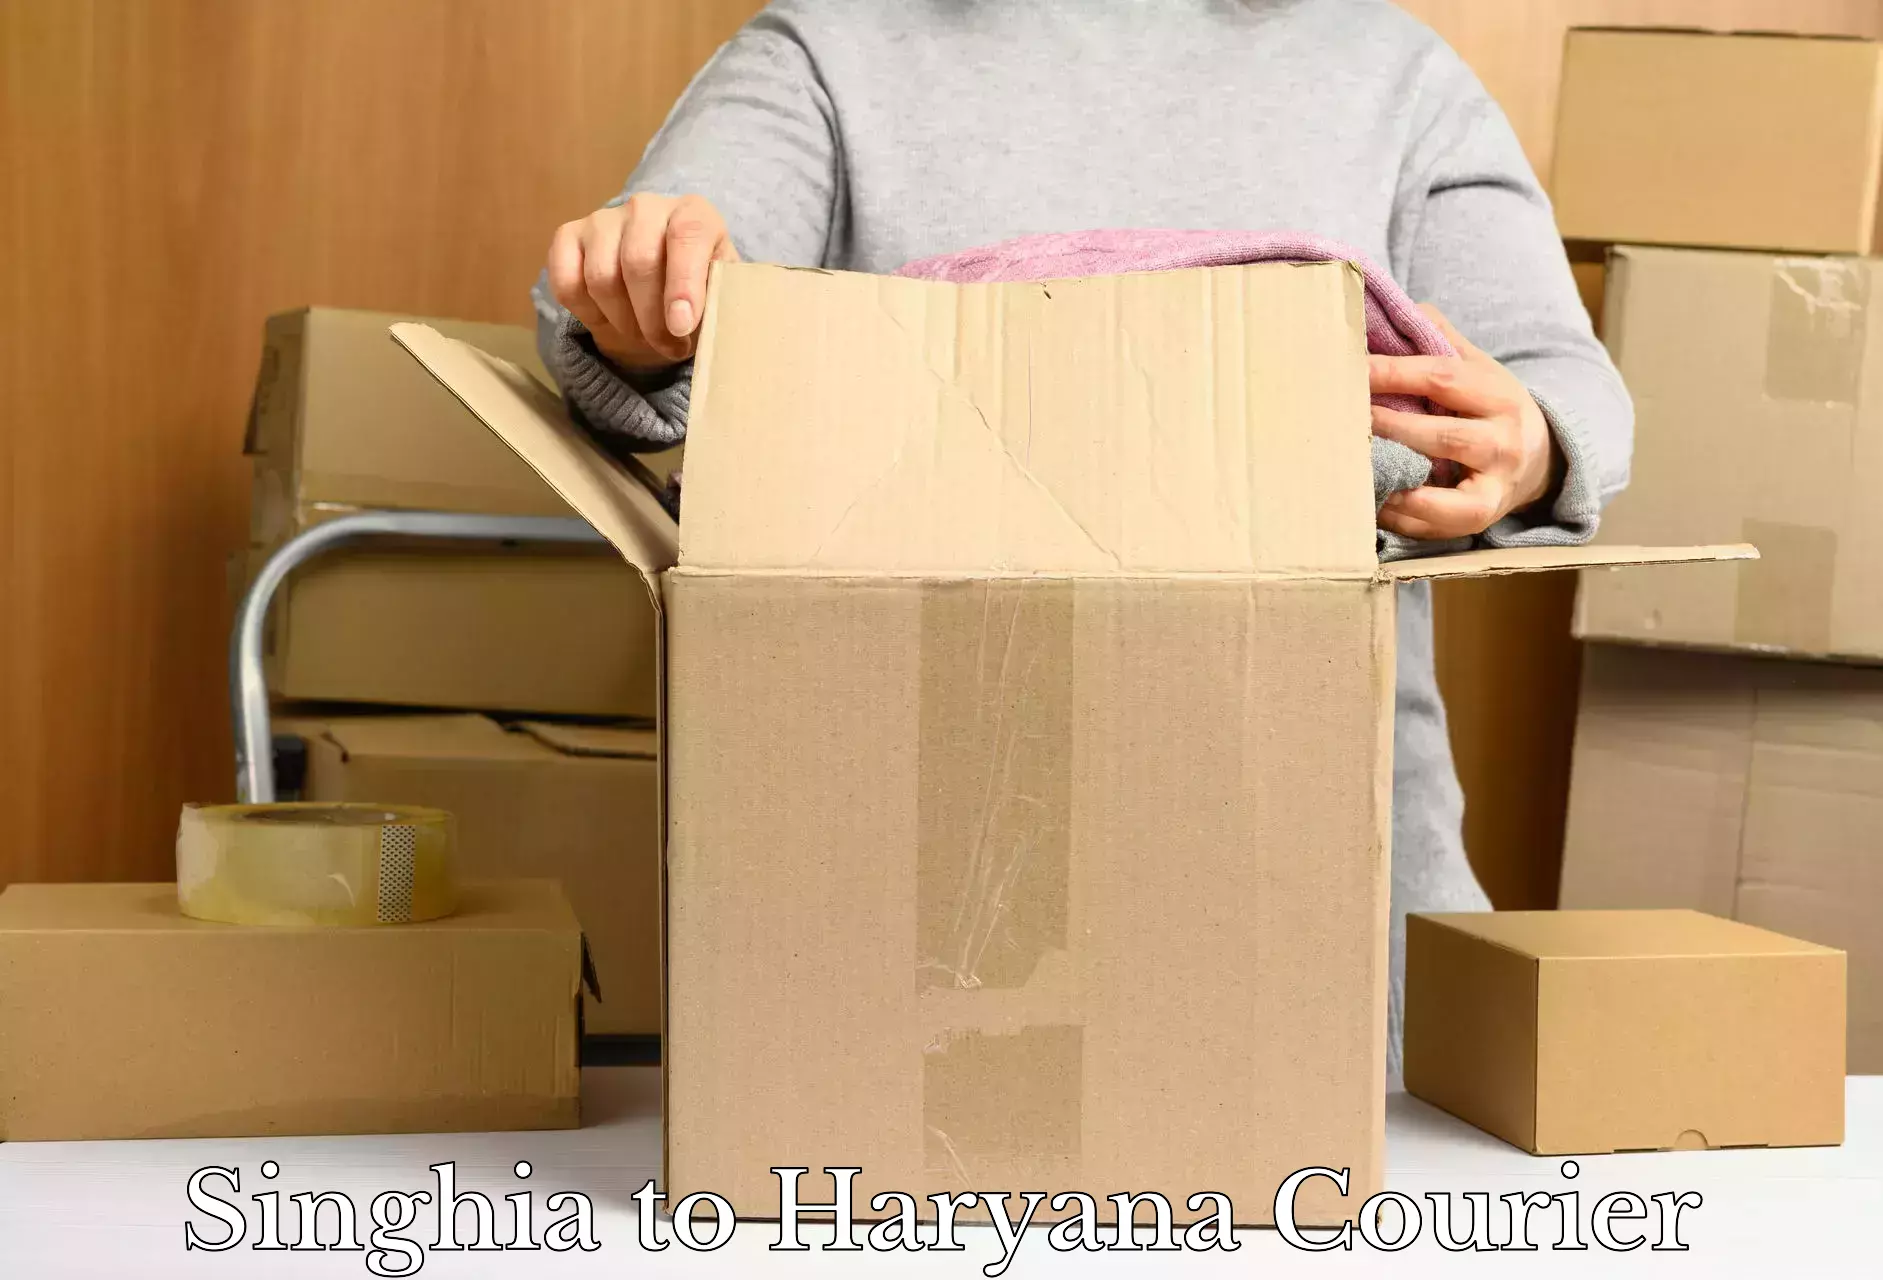 Professional relocation services Singhia to NCR Haryana